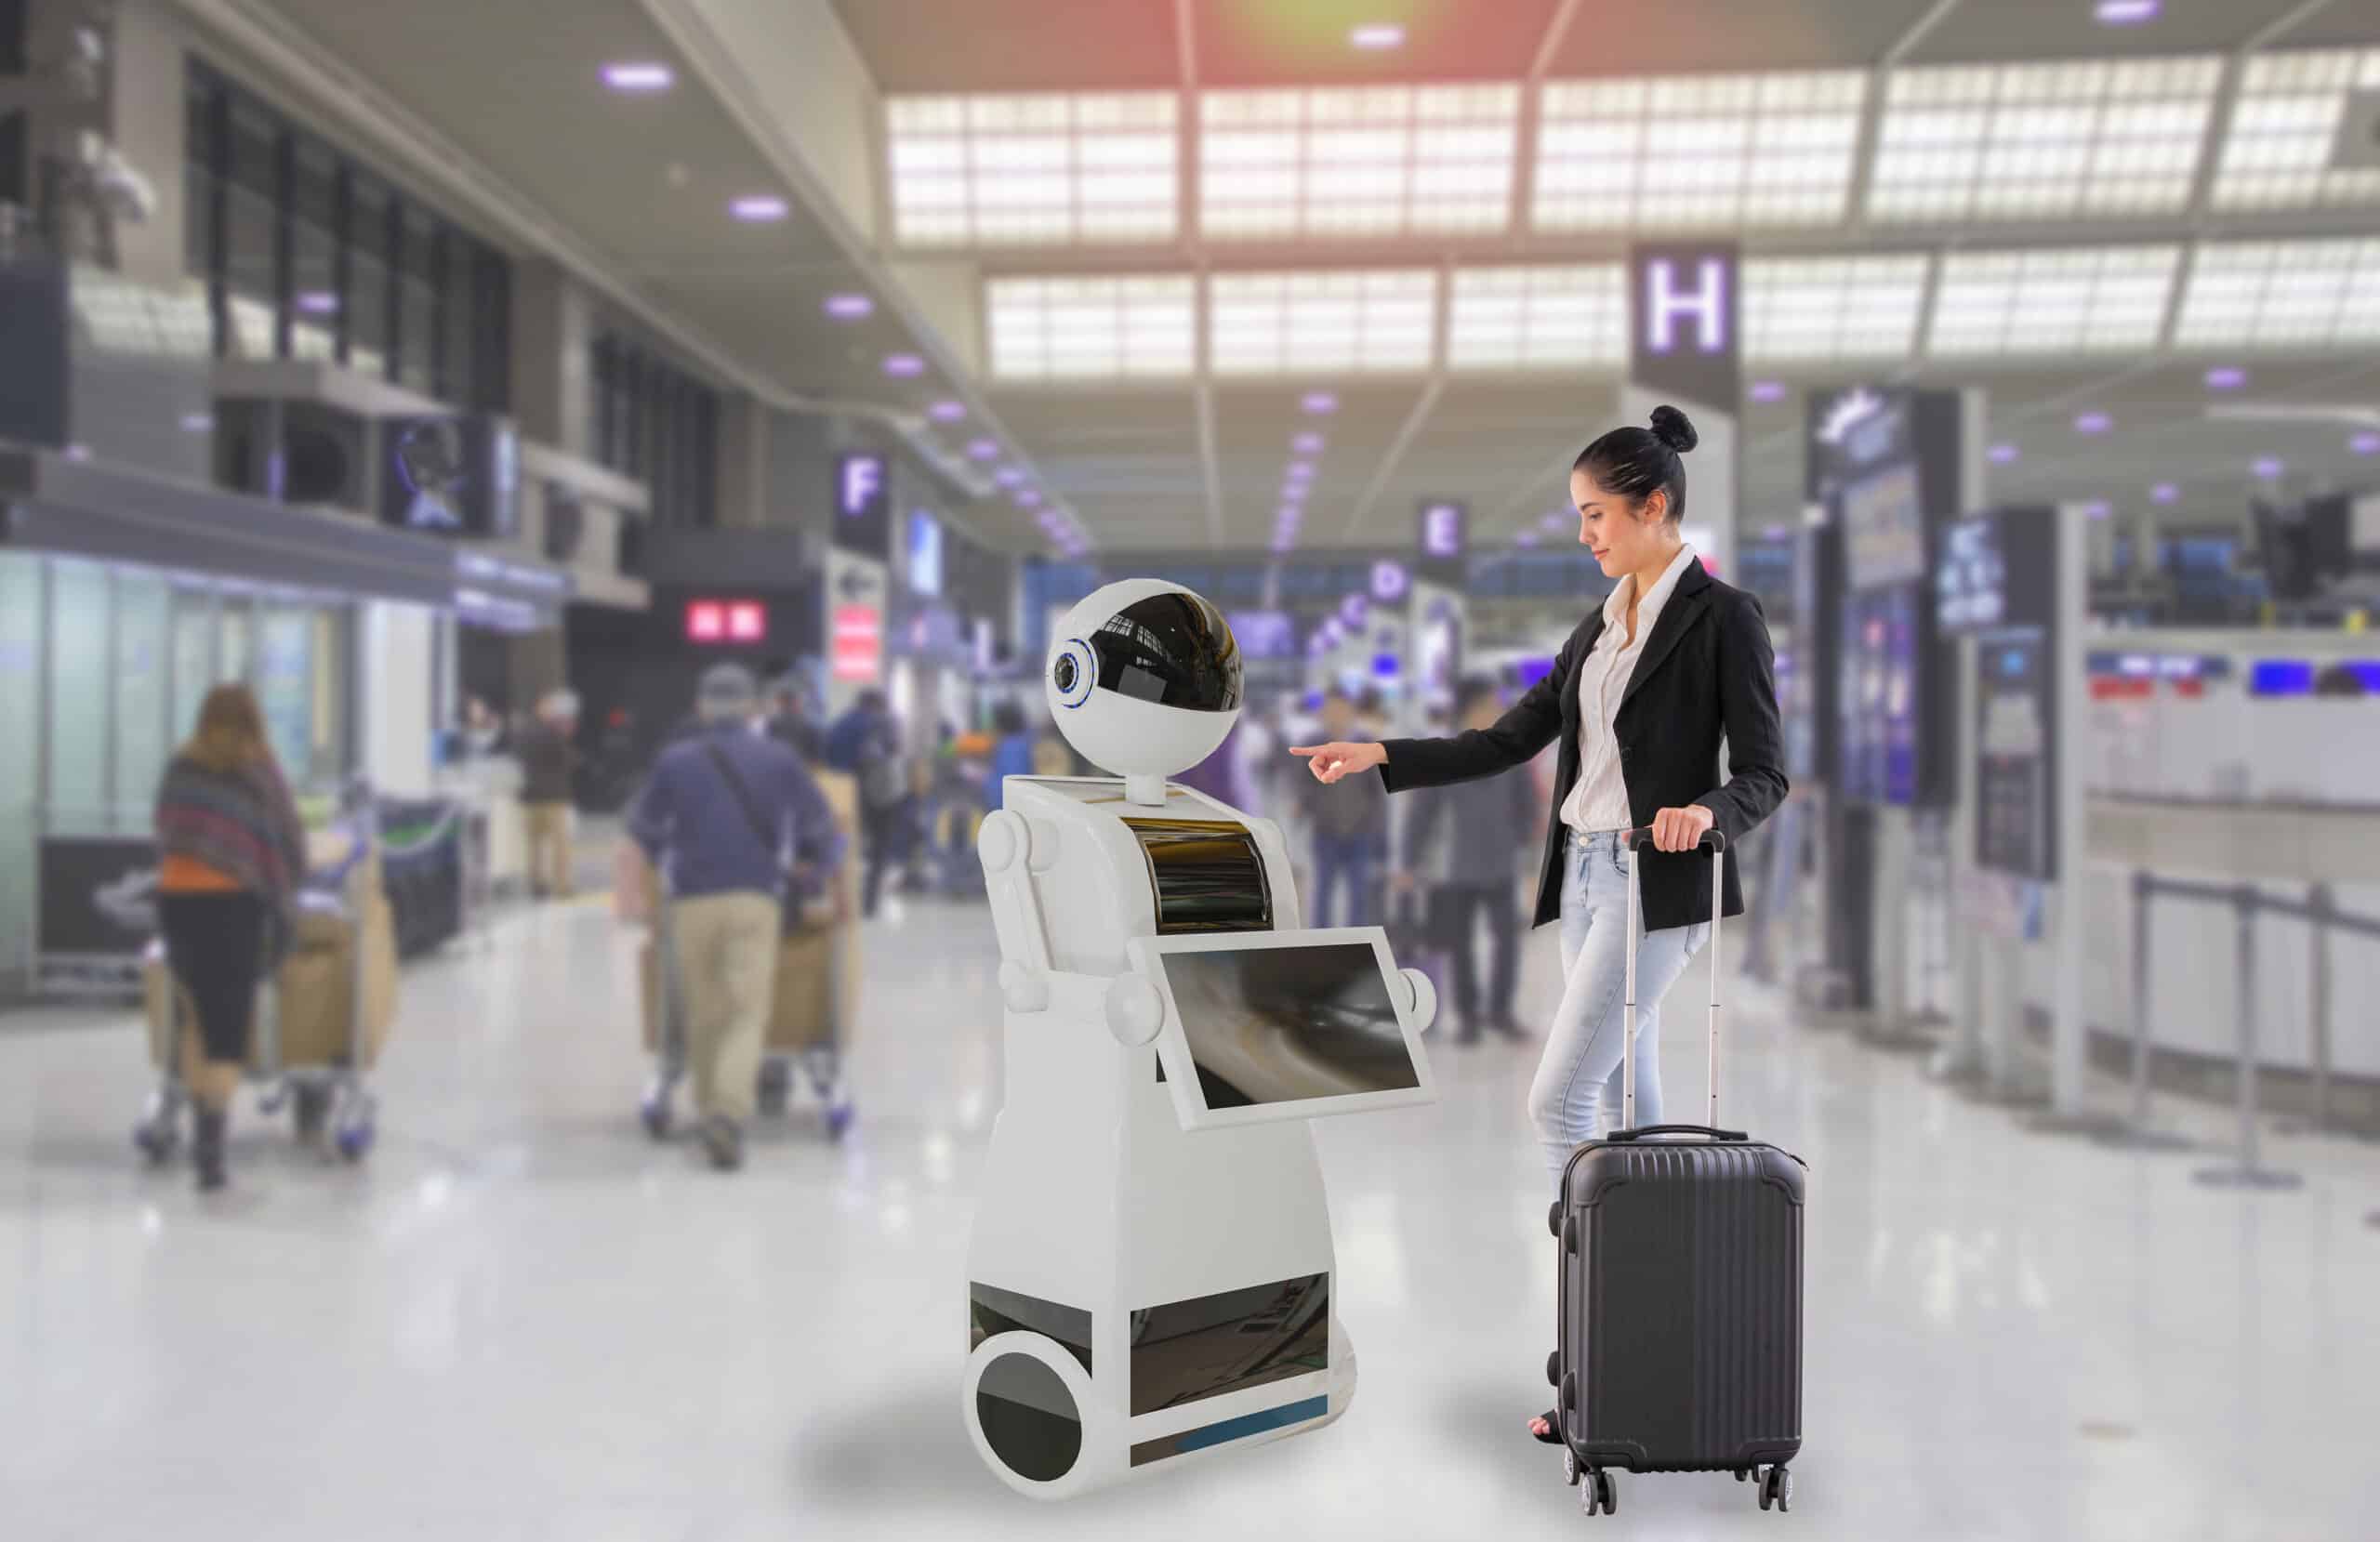 The future of travel is crazier than you can imagine